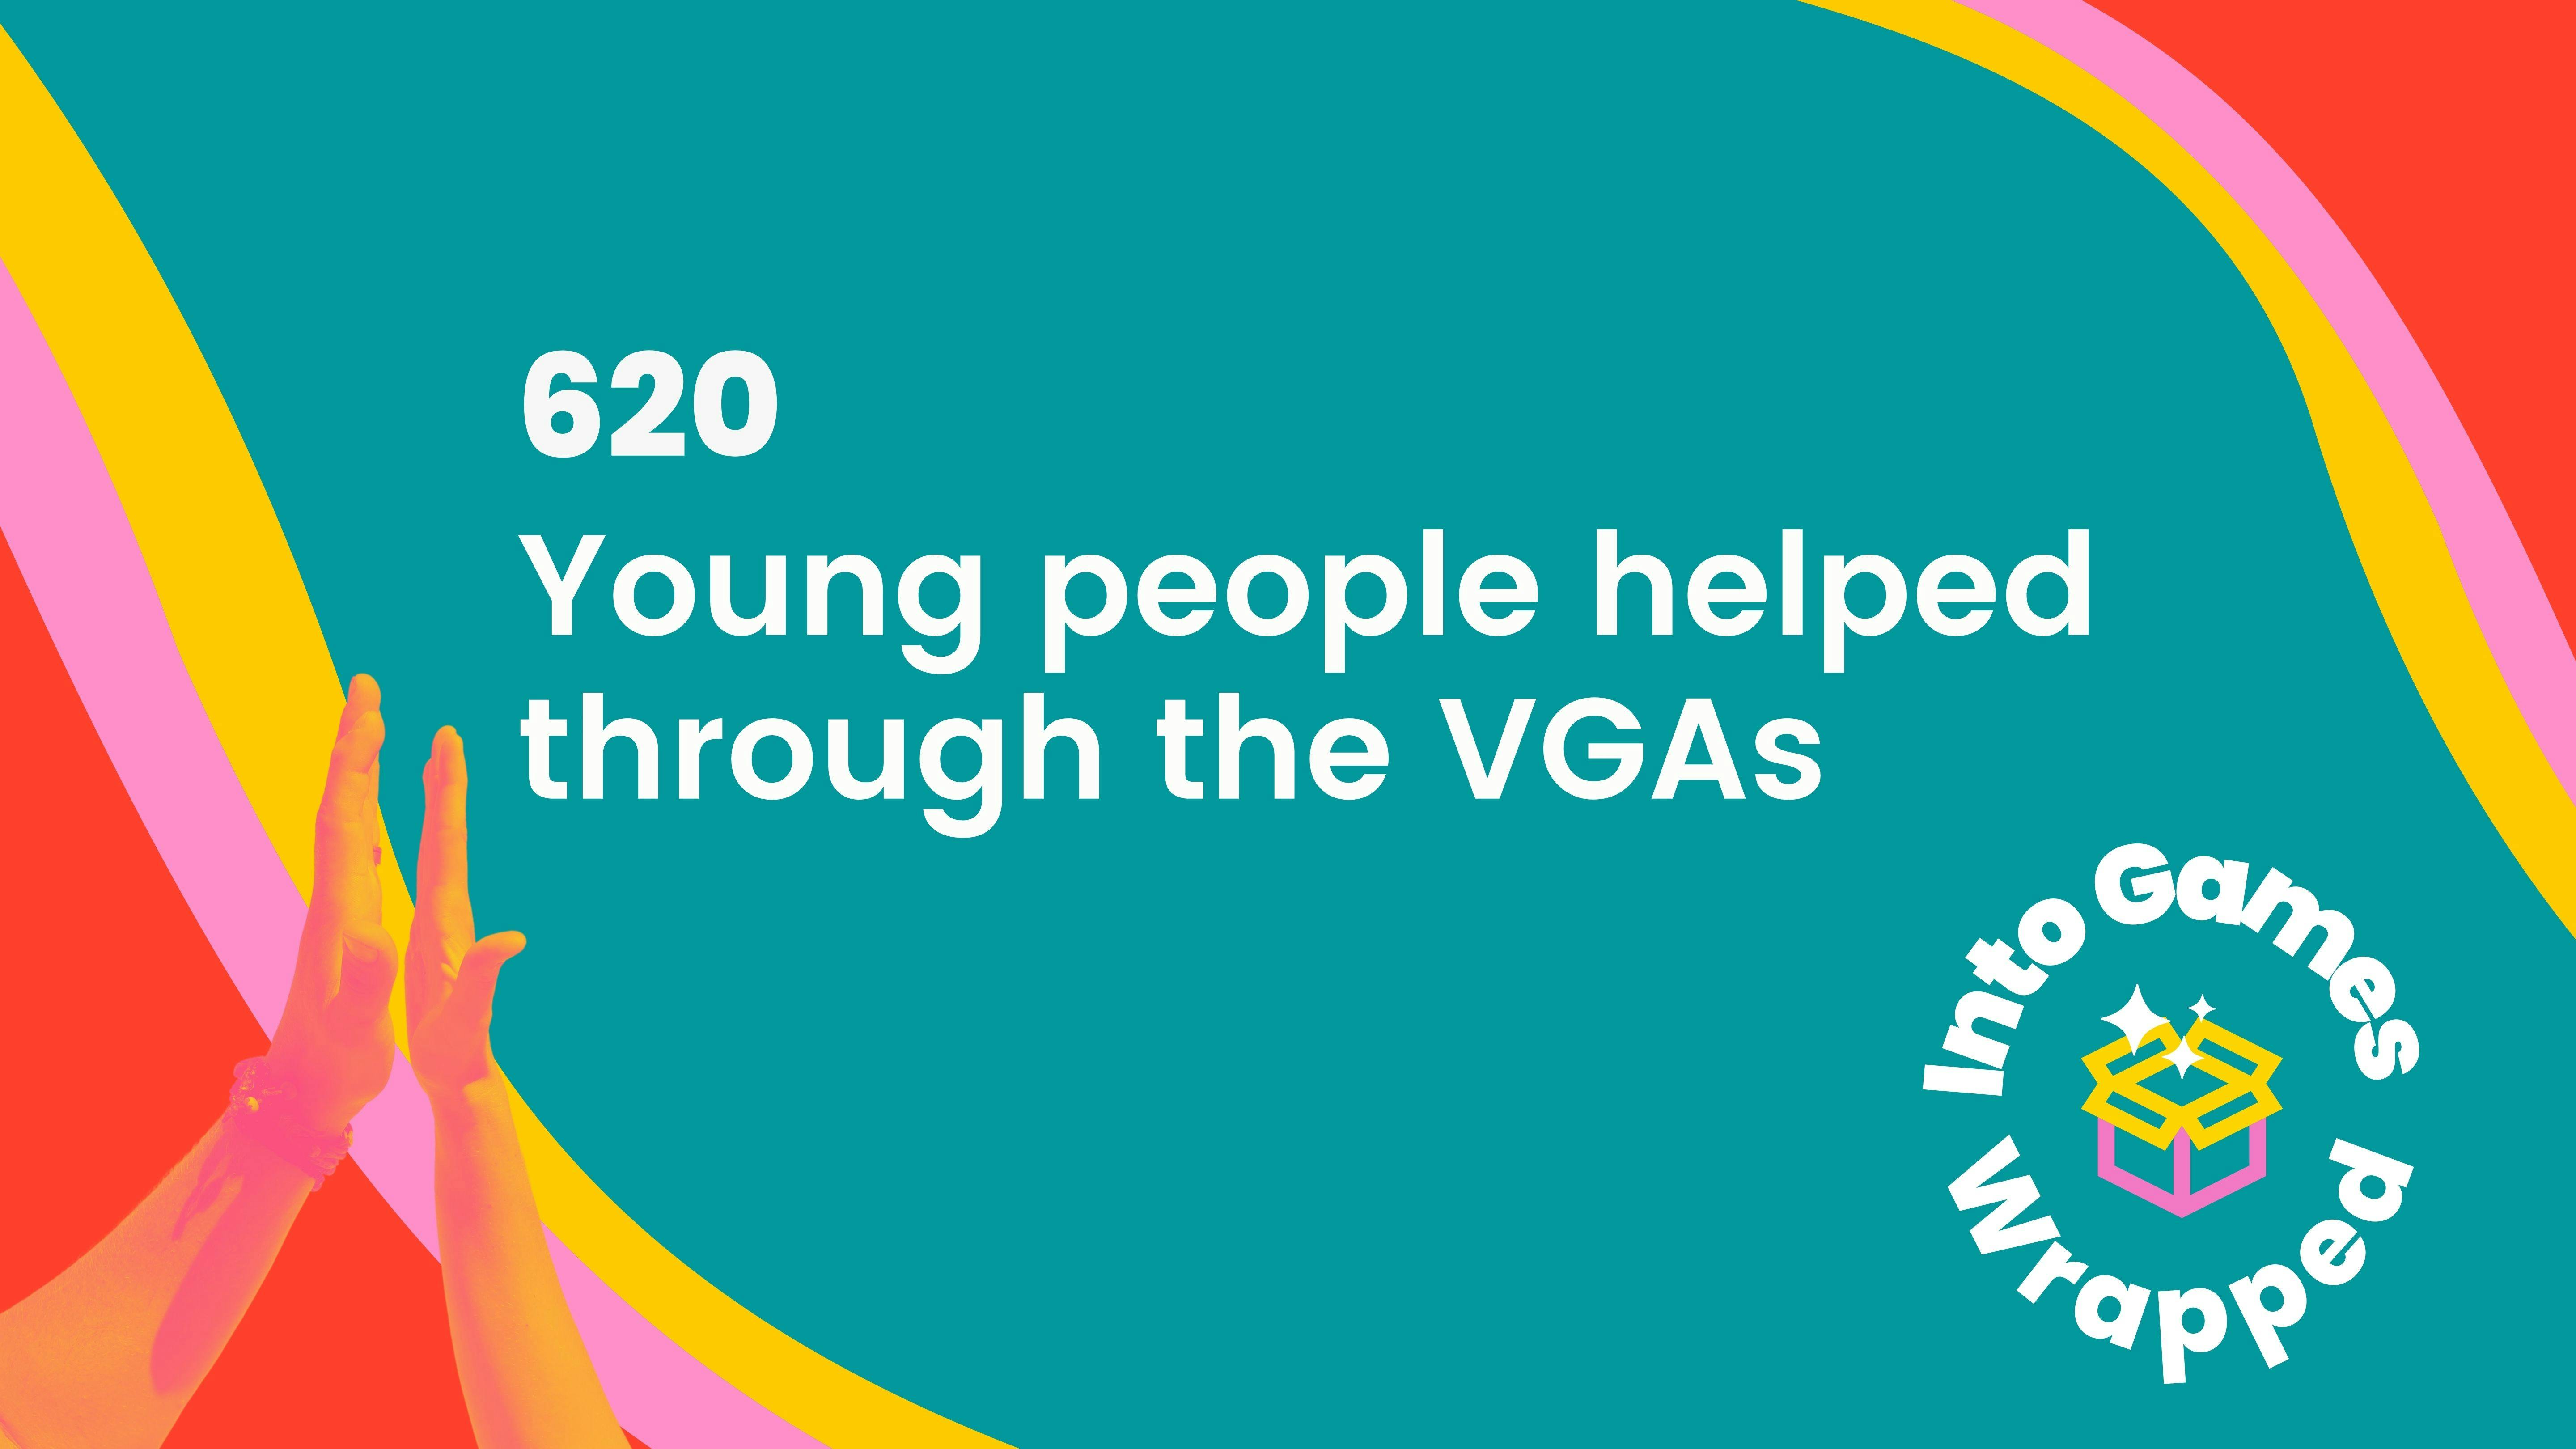 620 young people helped through the VGAs